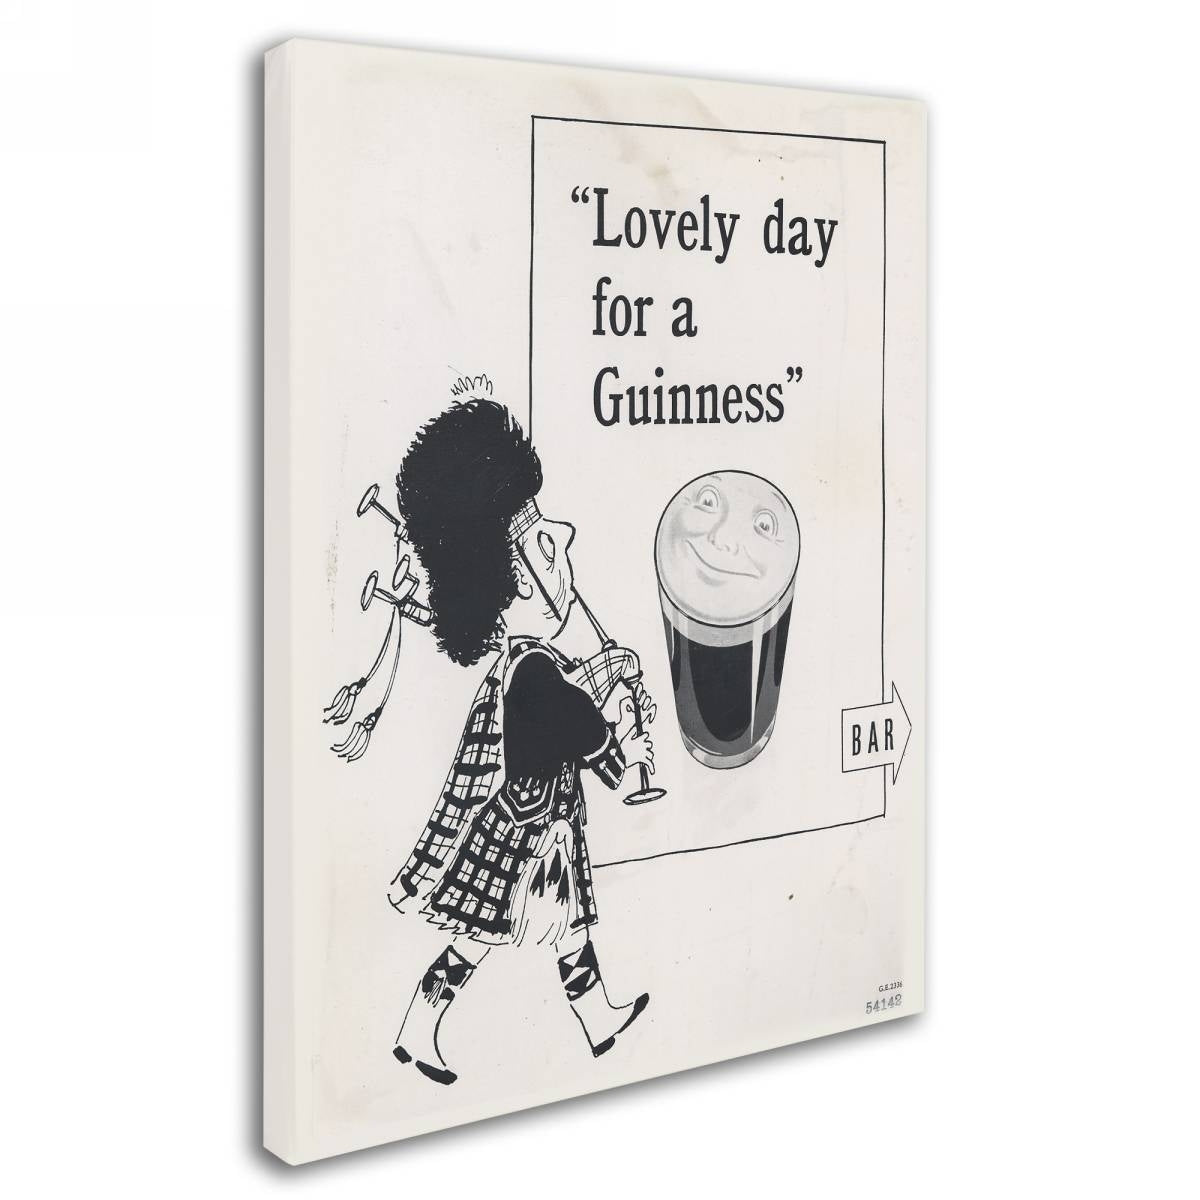 Lovely day for a Guinness canvas art print. 
Lovely day for a Guinness Brewery 'Lovely Day For A Guinness IV' Canvas Art.